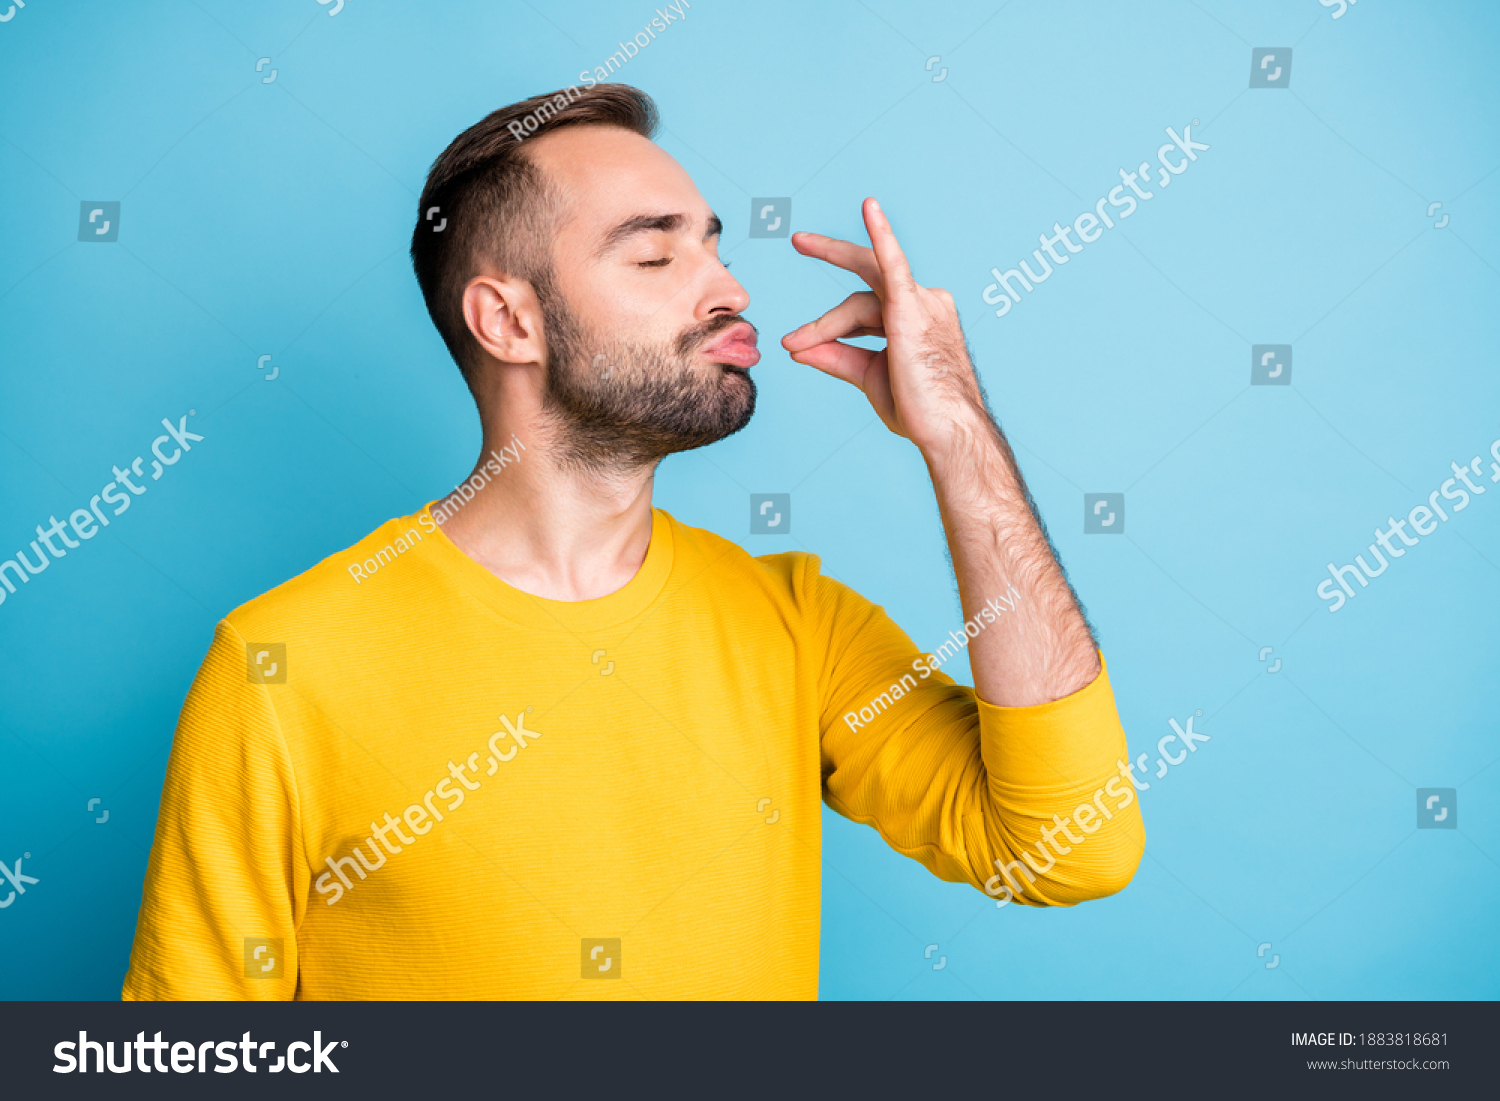 Photo portrait of guy with pouted lips showing gourmet sign with fingers tasty delicious isolated on vibrant blue color background #1883818681